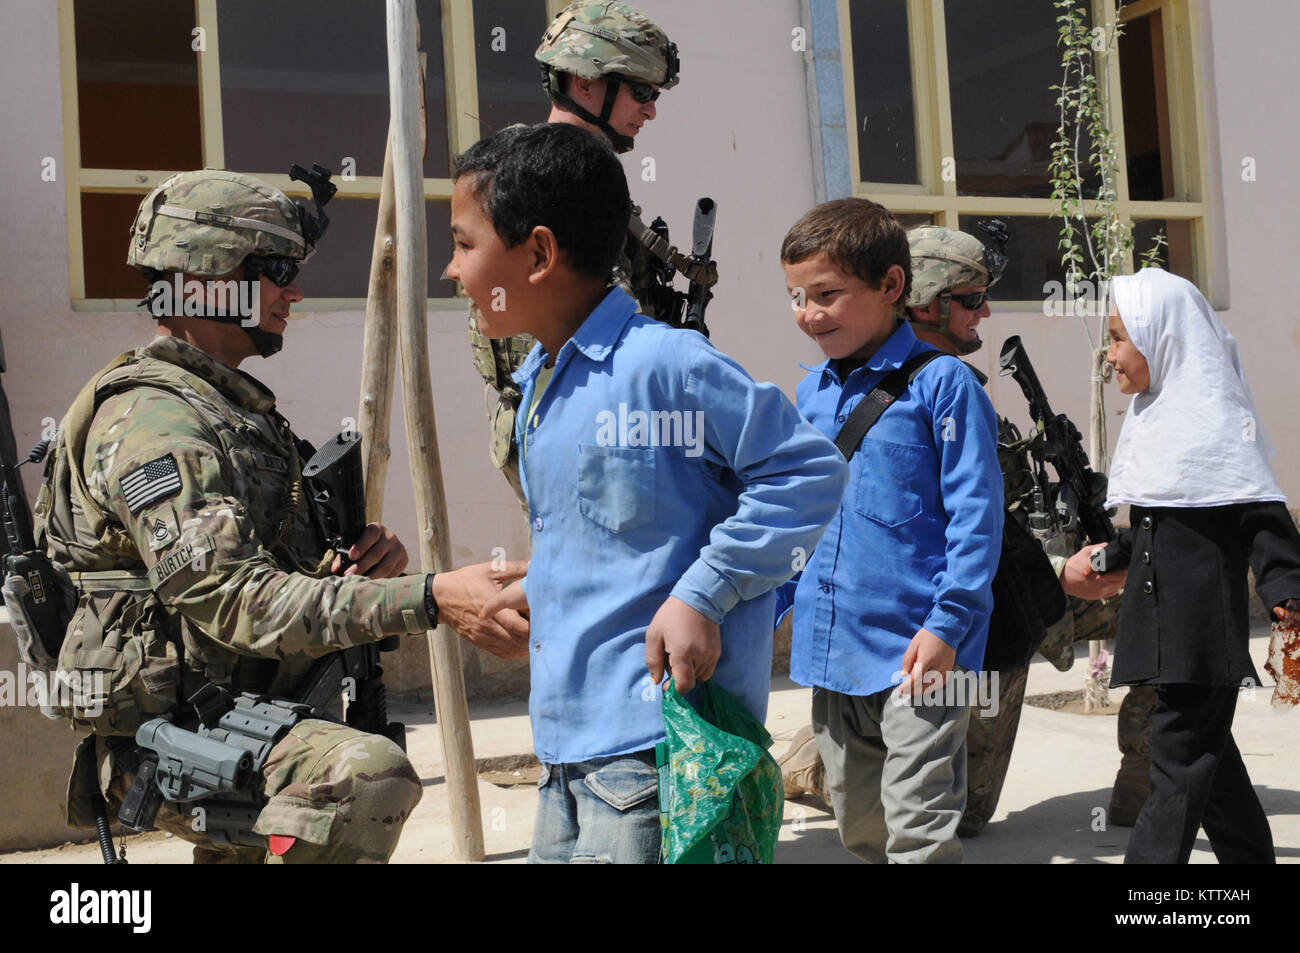 Sgt. 1st Class Grant Burtch, platoon sergeant for the personal security detail, Lt. Col. Joseph Gabriel, operations officer, and Sgt. John Dewey, team leader for the PSD, all assigned to Headquarters Company, 37th Infantry Brigade Combat Team shake hands with students as they leave the Aliabad School near Mazar-e-Sharif, Balkh Province, Afghanistan, April 3, 2012. A new school is being built for the students as one of the 37th's commander's emergency relief program projects. The 37th IBCT is deployed to Afghanistan in support of Operation Enduring Freedom. (37th IBCT photo by Sgt. Kimberly Lam Stock Photo